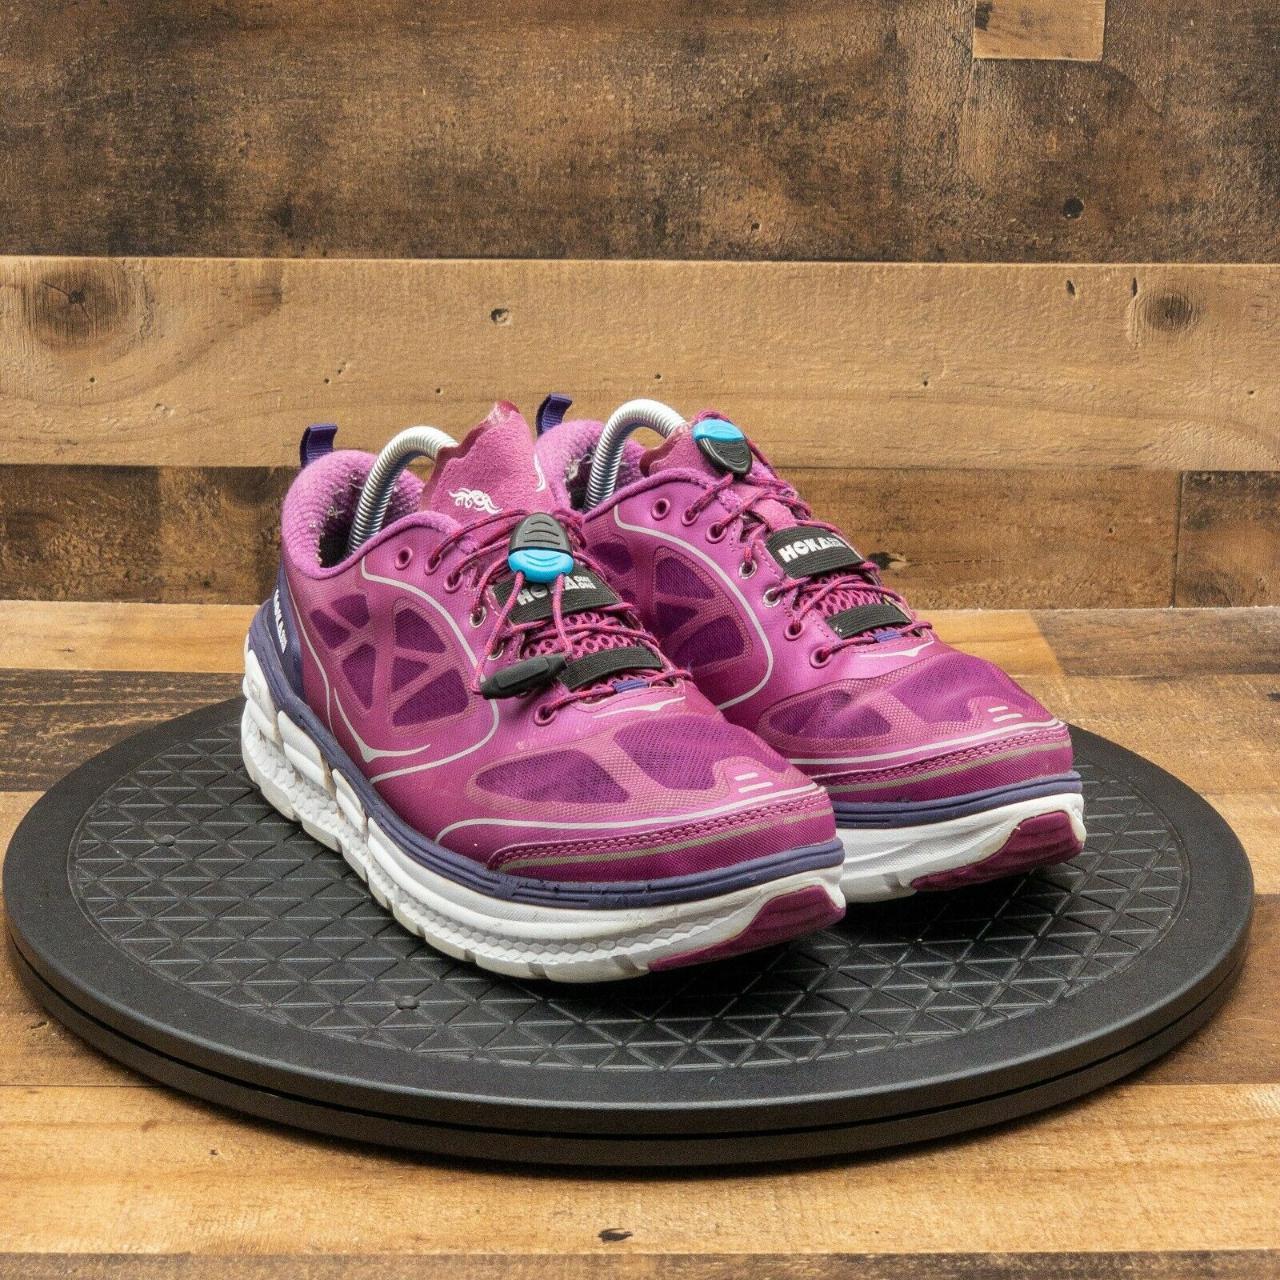 Product Image 1 - Hoka One One Conquest Women's